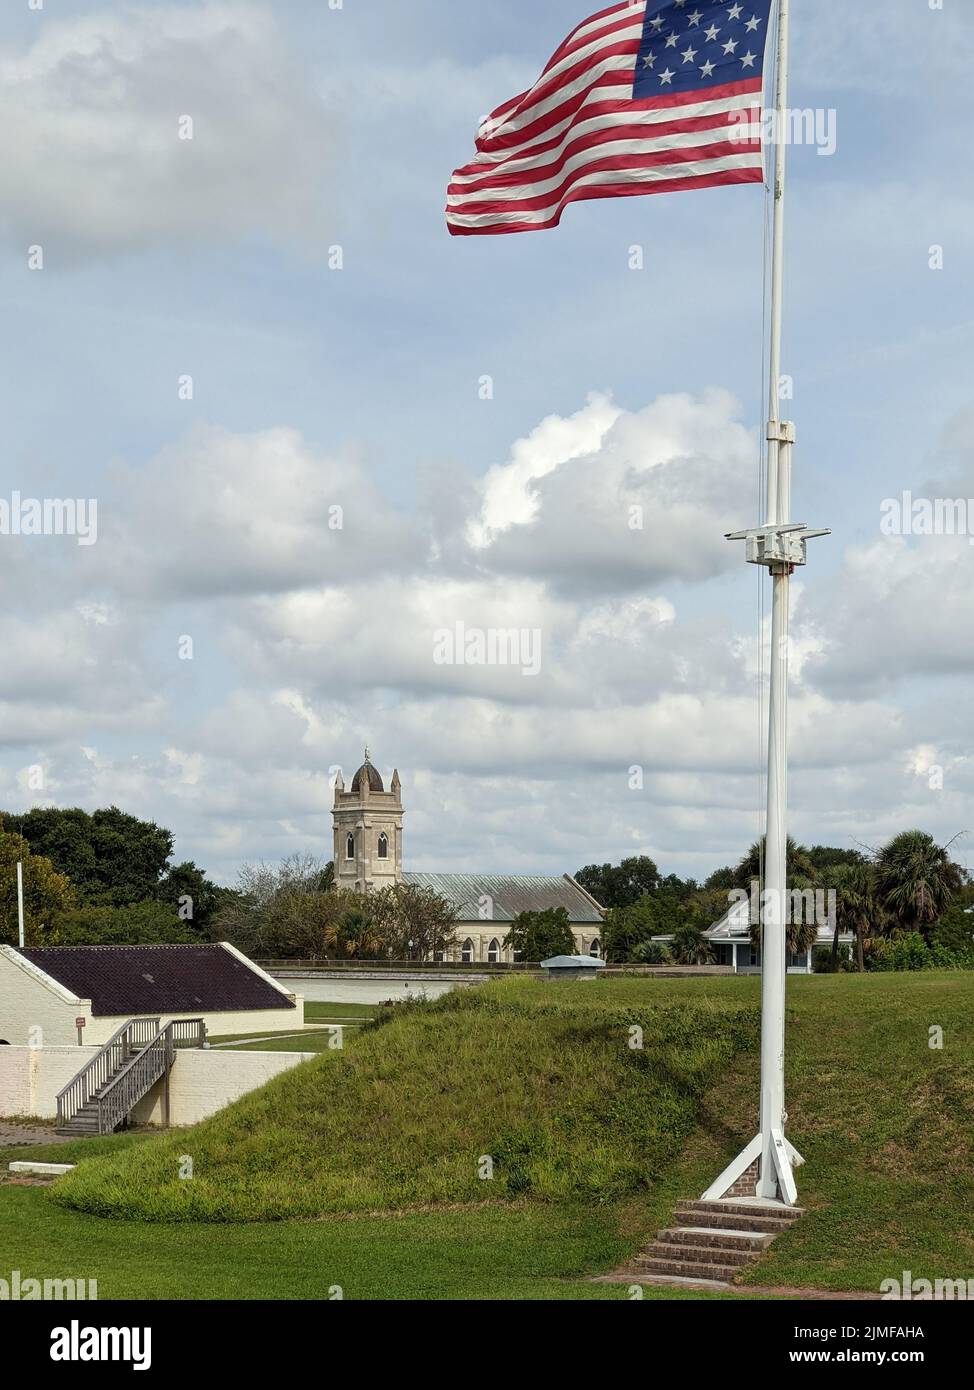 Scenes at Fort Moultrie on Sullivan's island Charleston, South Carolina from the American Revolutionary war protecting the harbo Stock Photo